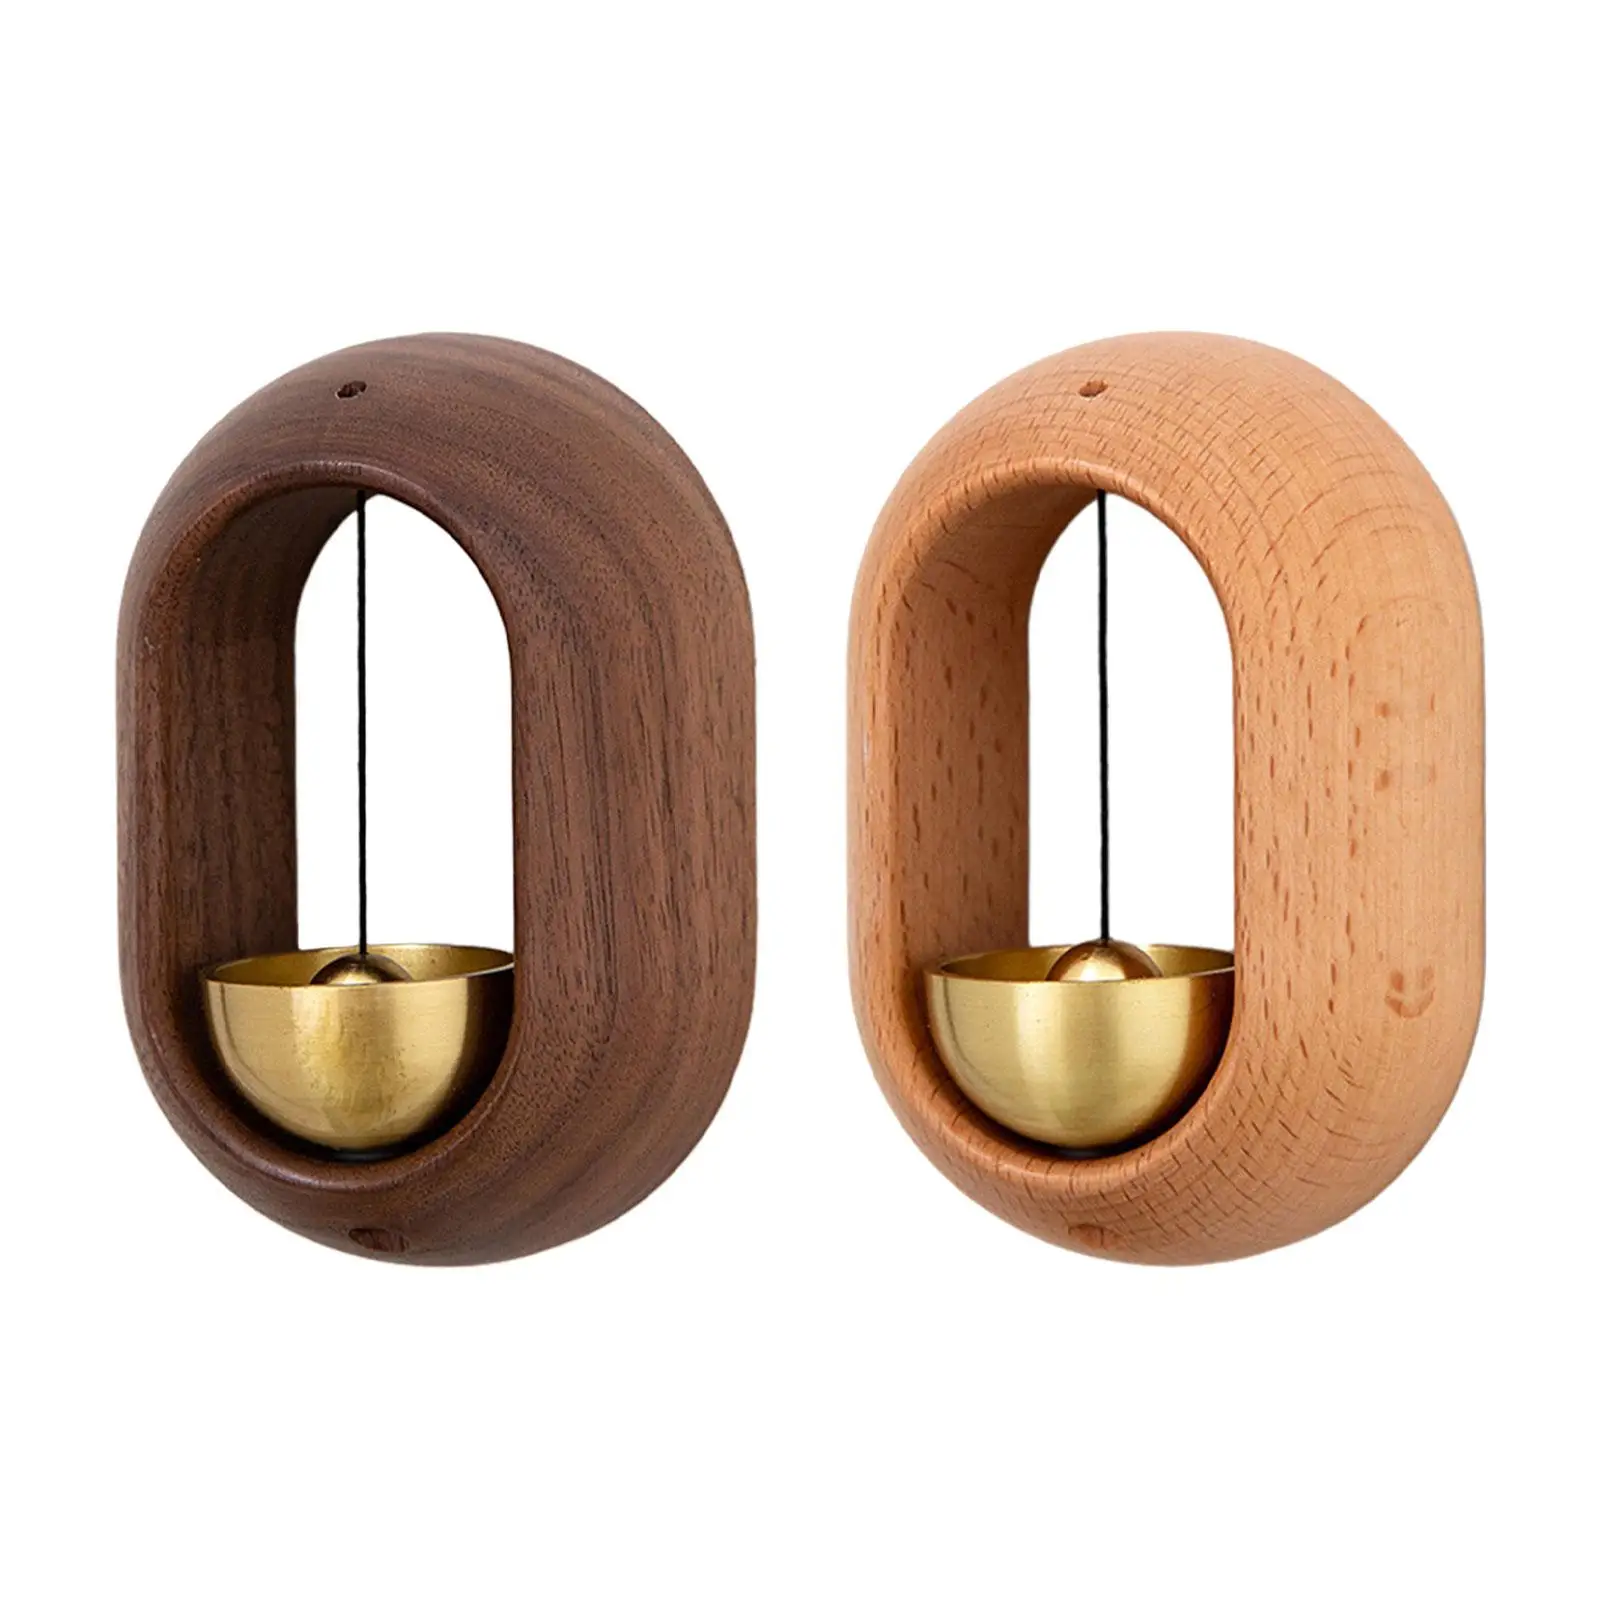 Shopkeepers Bell Japanese Style Wood Entry Doorbell for Shop Entrance Fridge